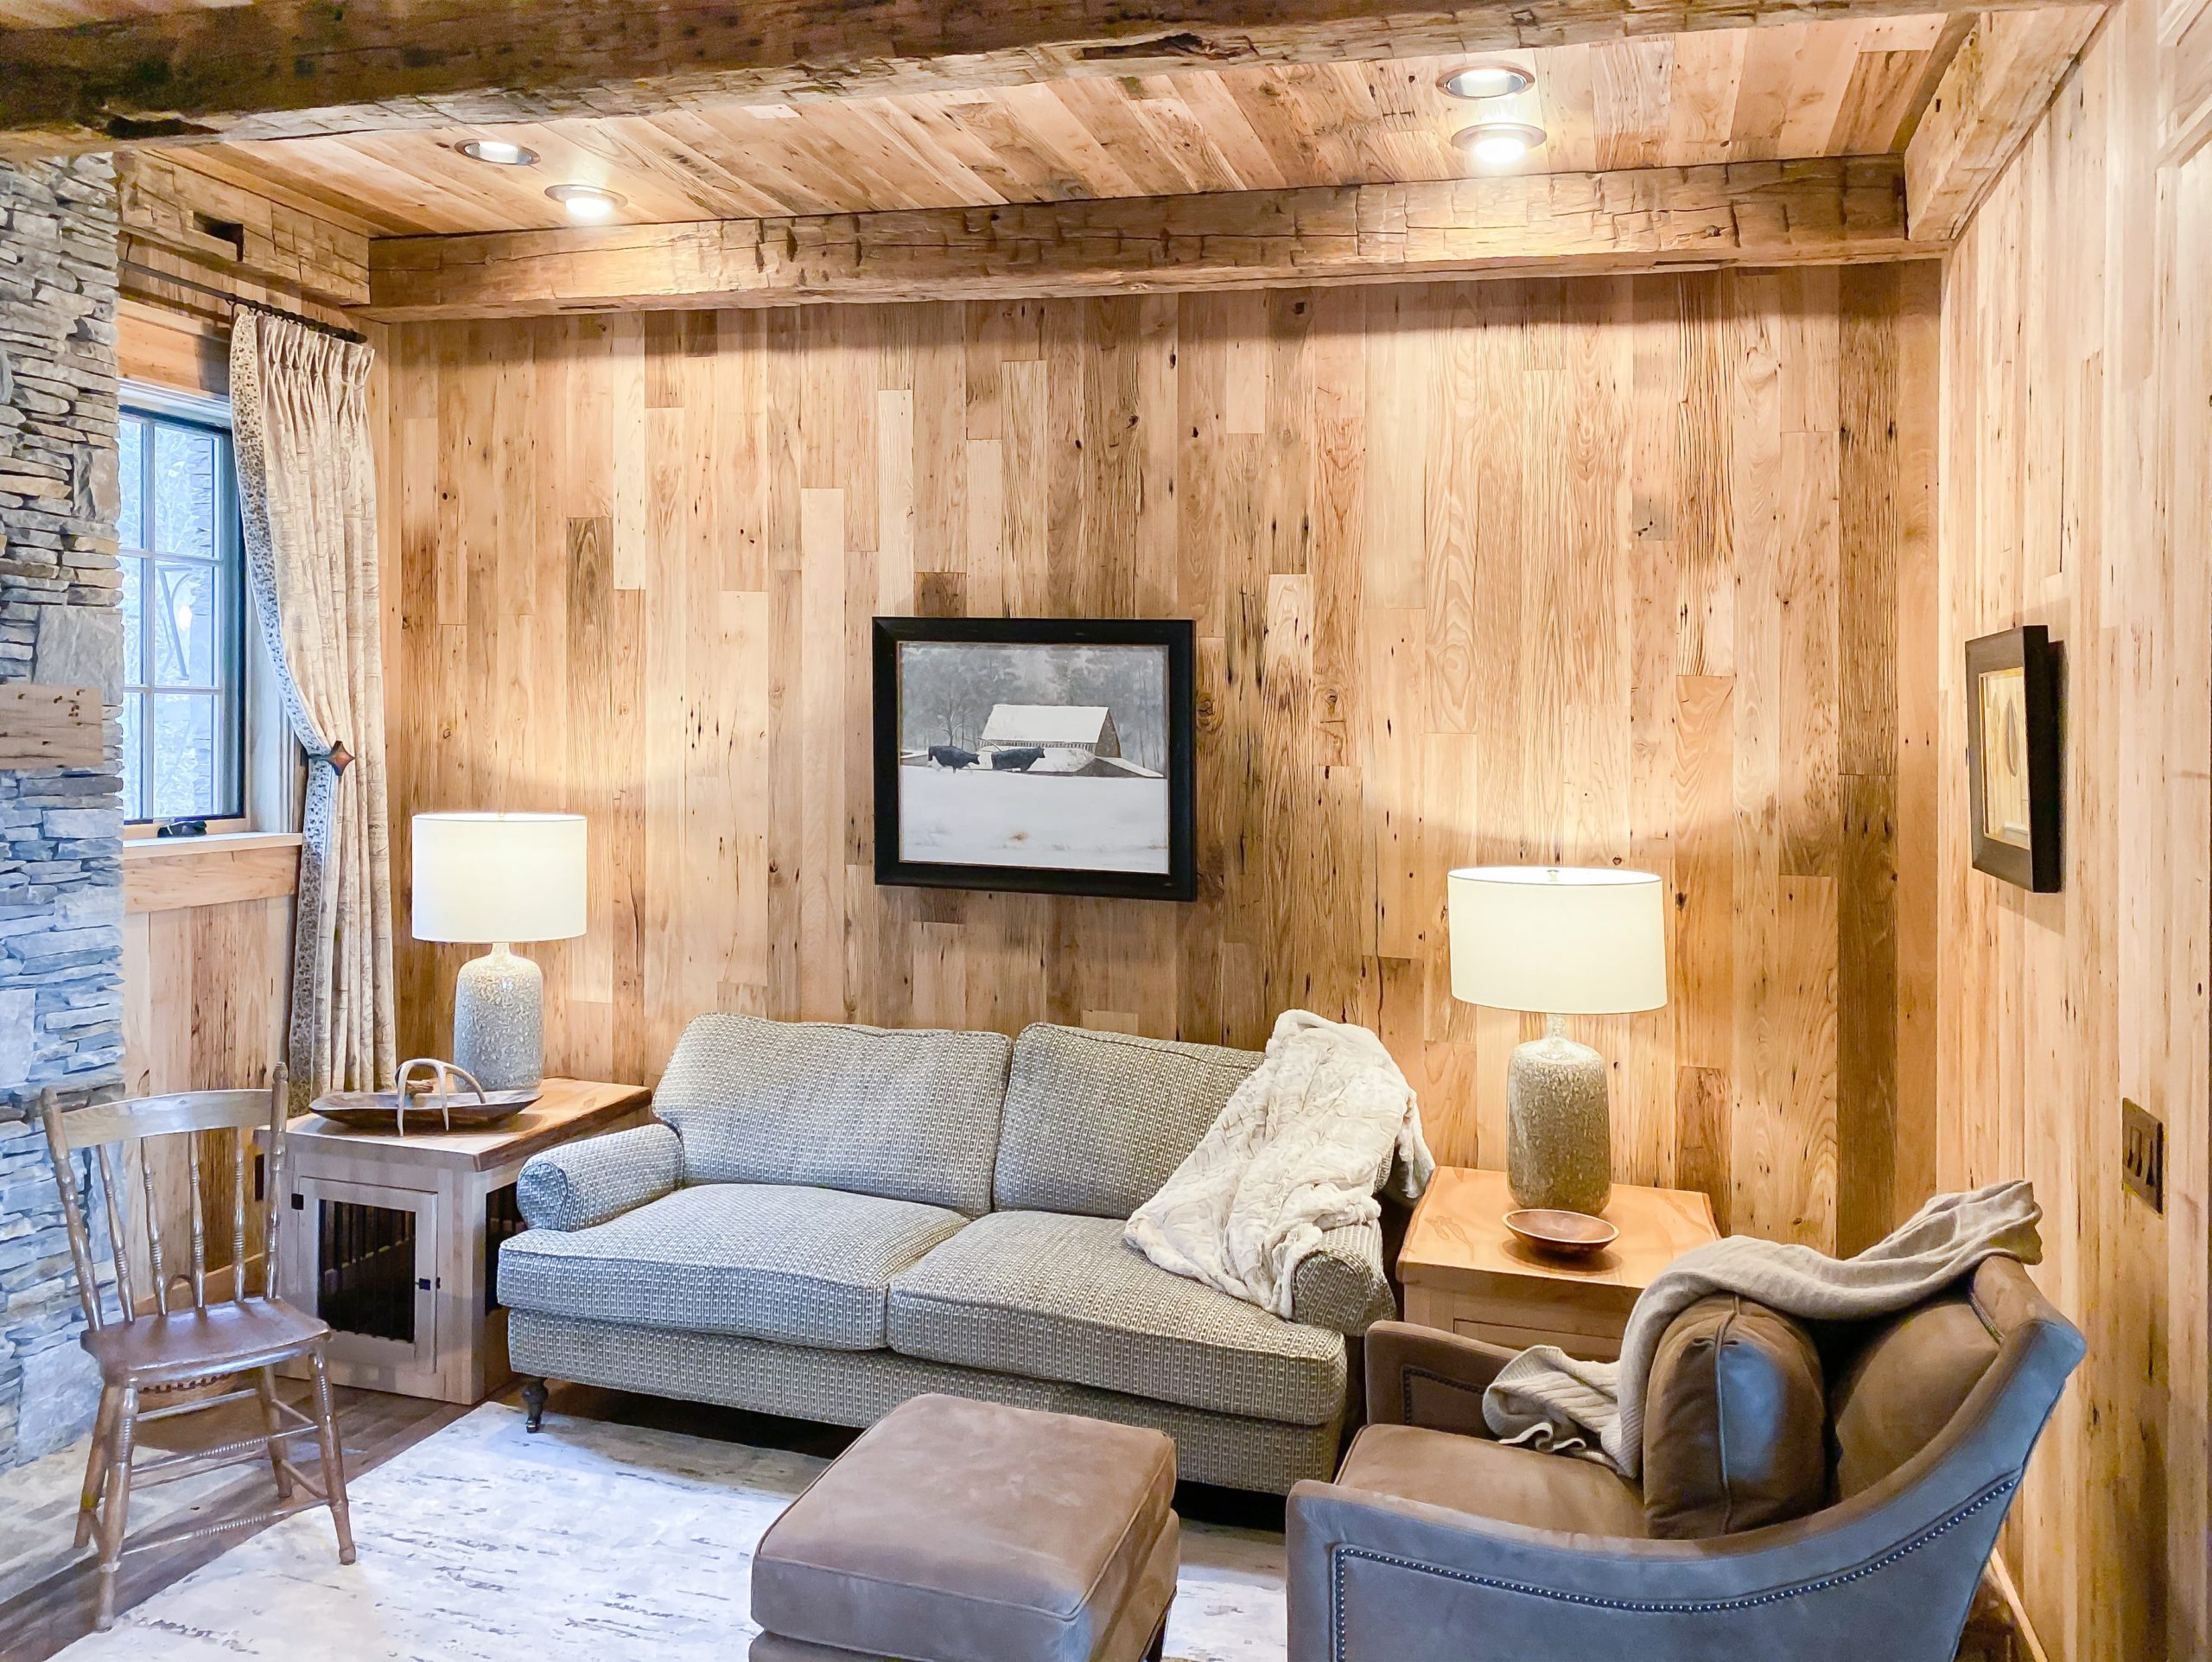 Wormy Chestnut Wall & Ceiling Planking + Hand Hewn Beams